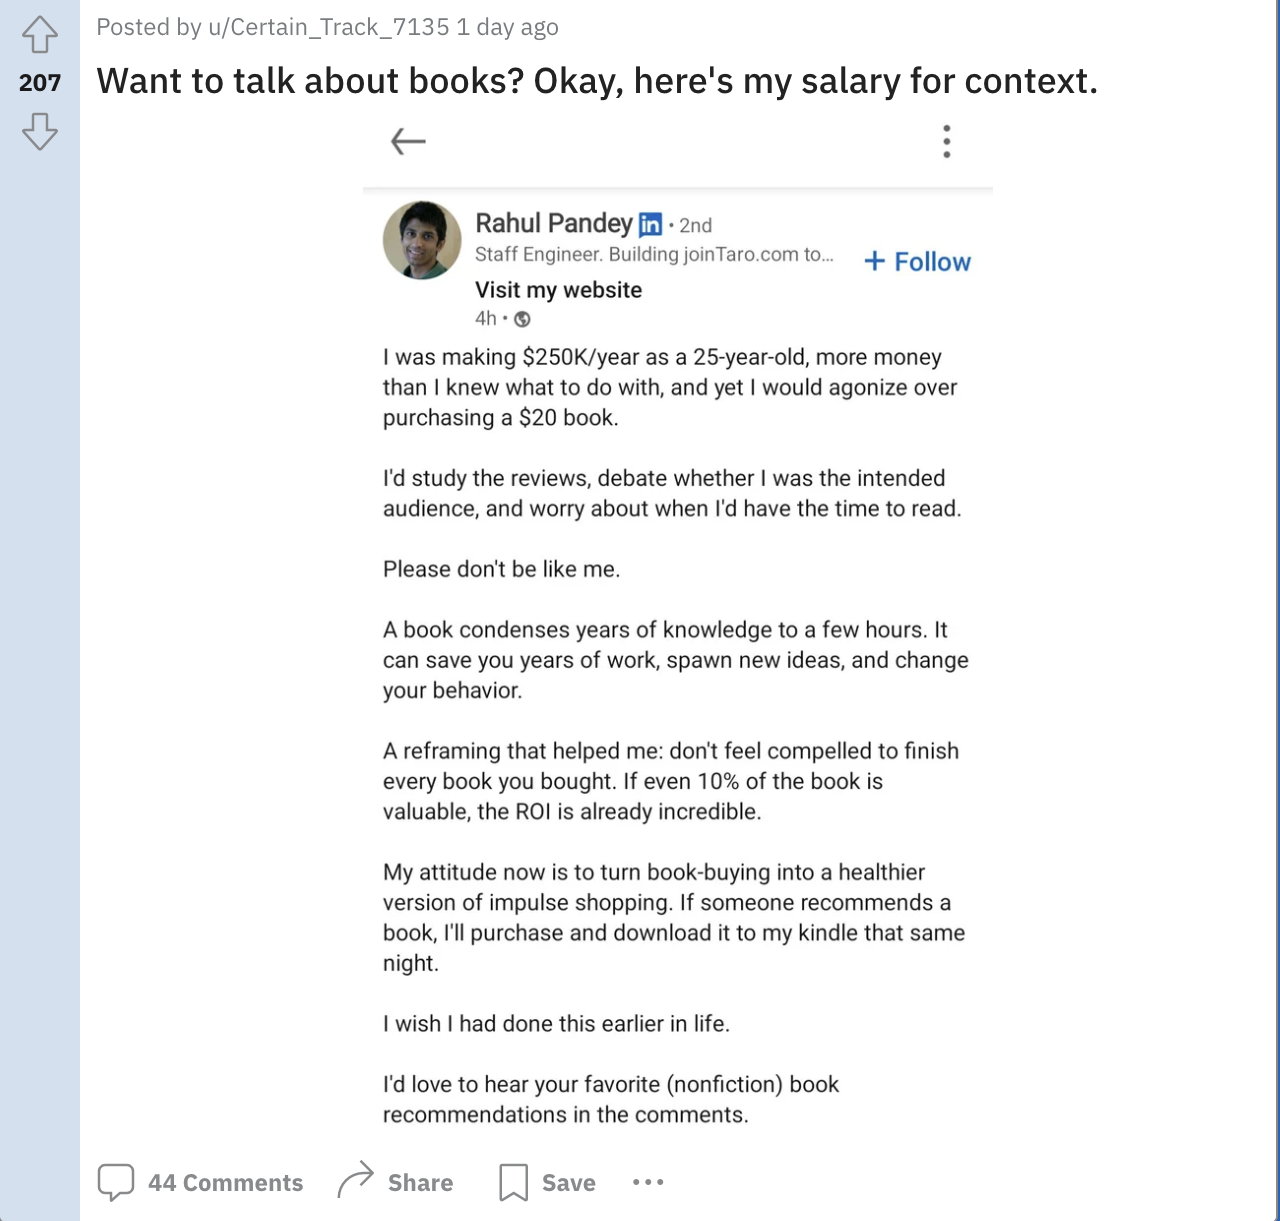 screenshot - Posted by uCertain_Track_7135 1 day ago 207 Want to talk about books? Okay, here's my salary for context. Rahul Pandey in 2nd Staff Engineer. Building joinTaro.com to... Visit my website 4h Q I was making $year as a 25yearold, more money than